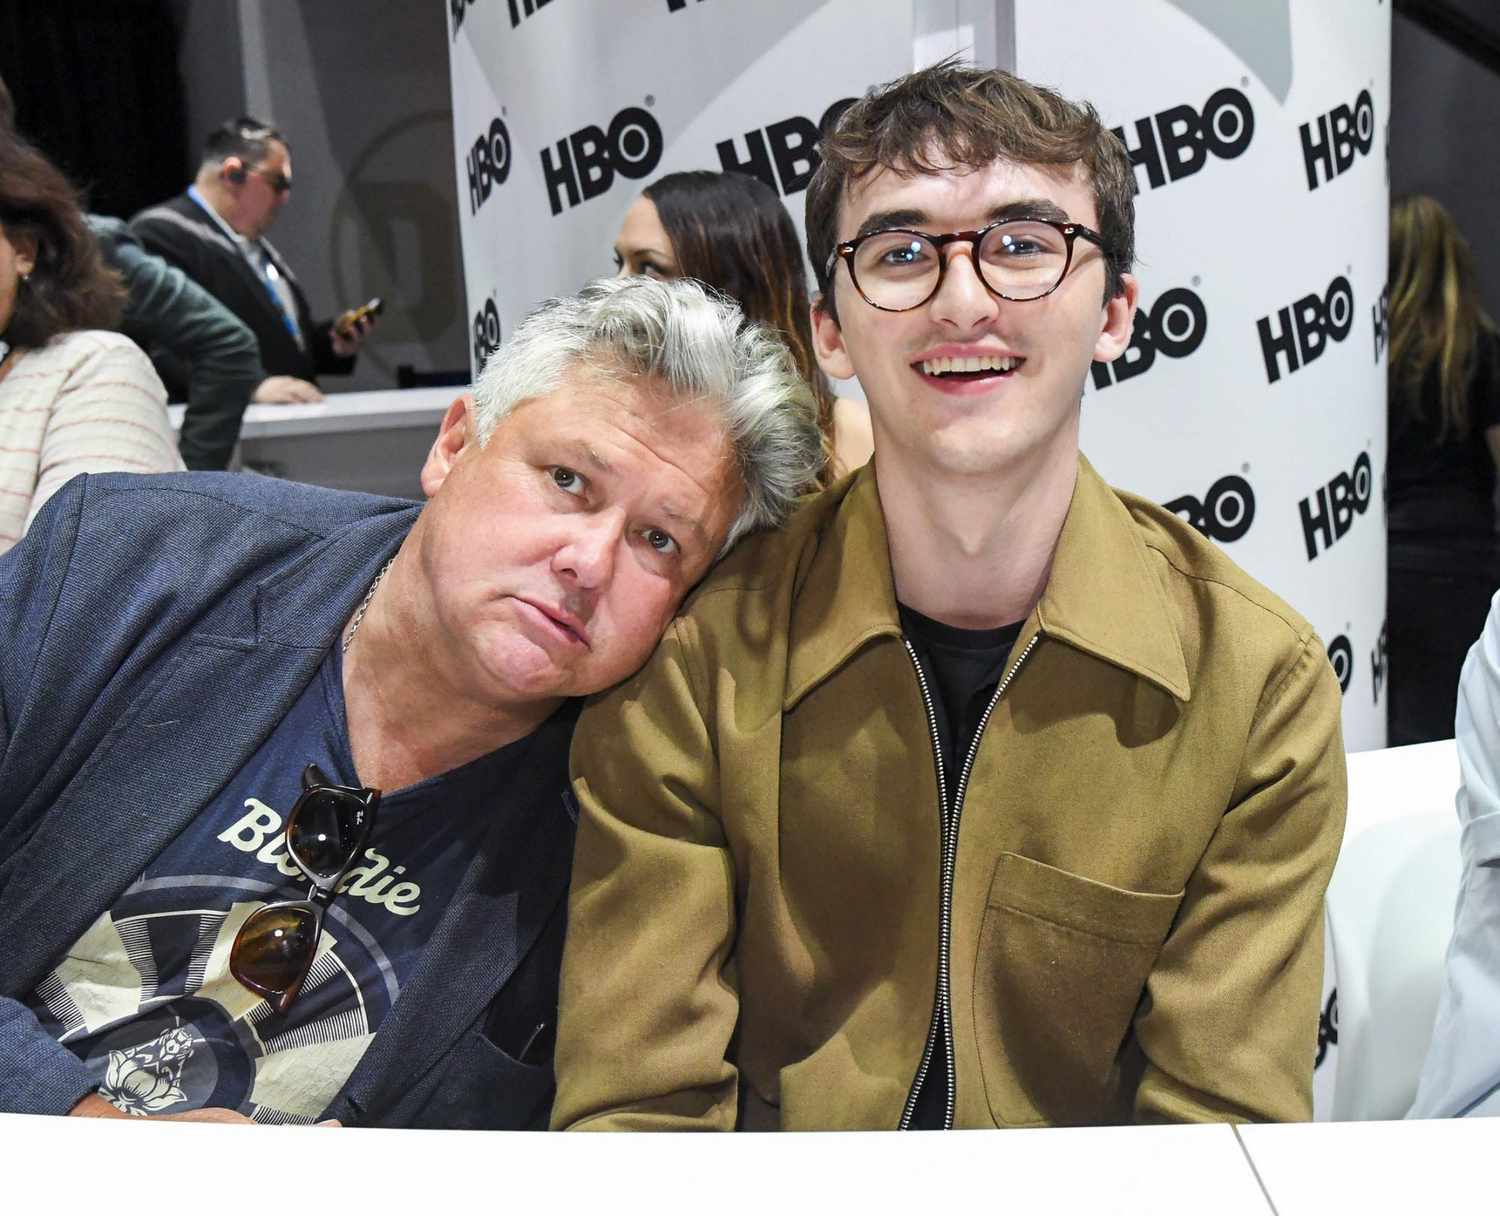 SAN DIEGO, CALIFORNIA - JULY 19: Conleth Hill and Isaac Hempstead Wright at &ldquo;Game Of Thrones&rdquo; Comic Con Autograph Signing 2019 on July 19, 2019 in San Diego, California. (Photo by Jeff Kravitz/FilmMagic for HBO)